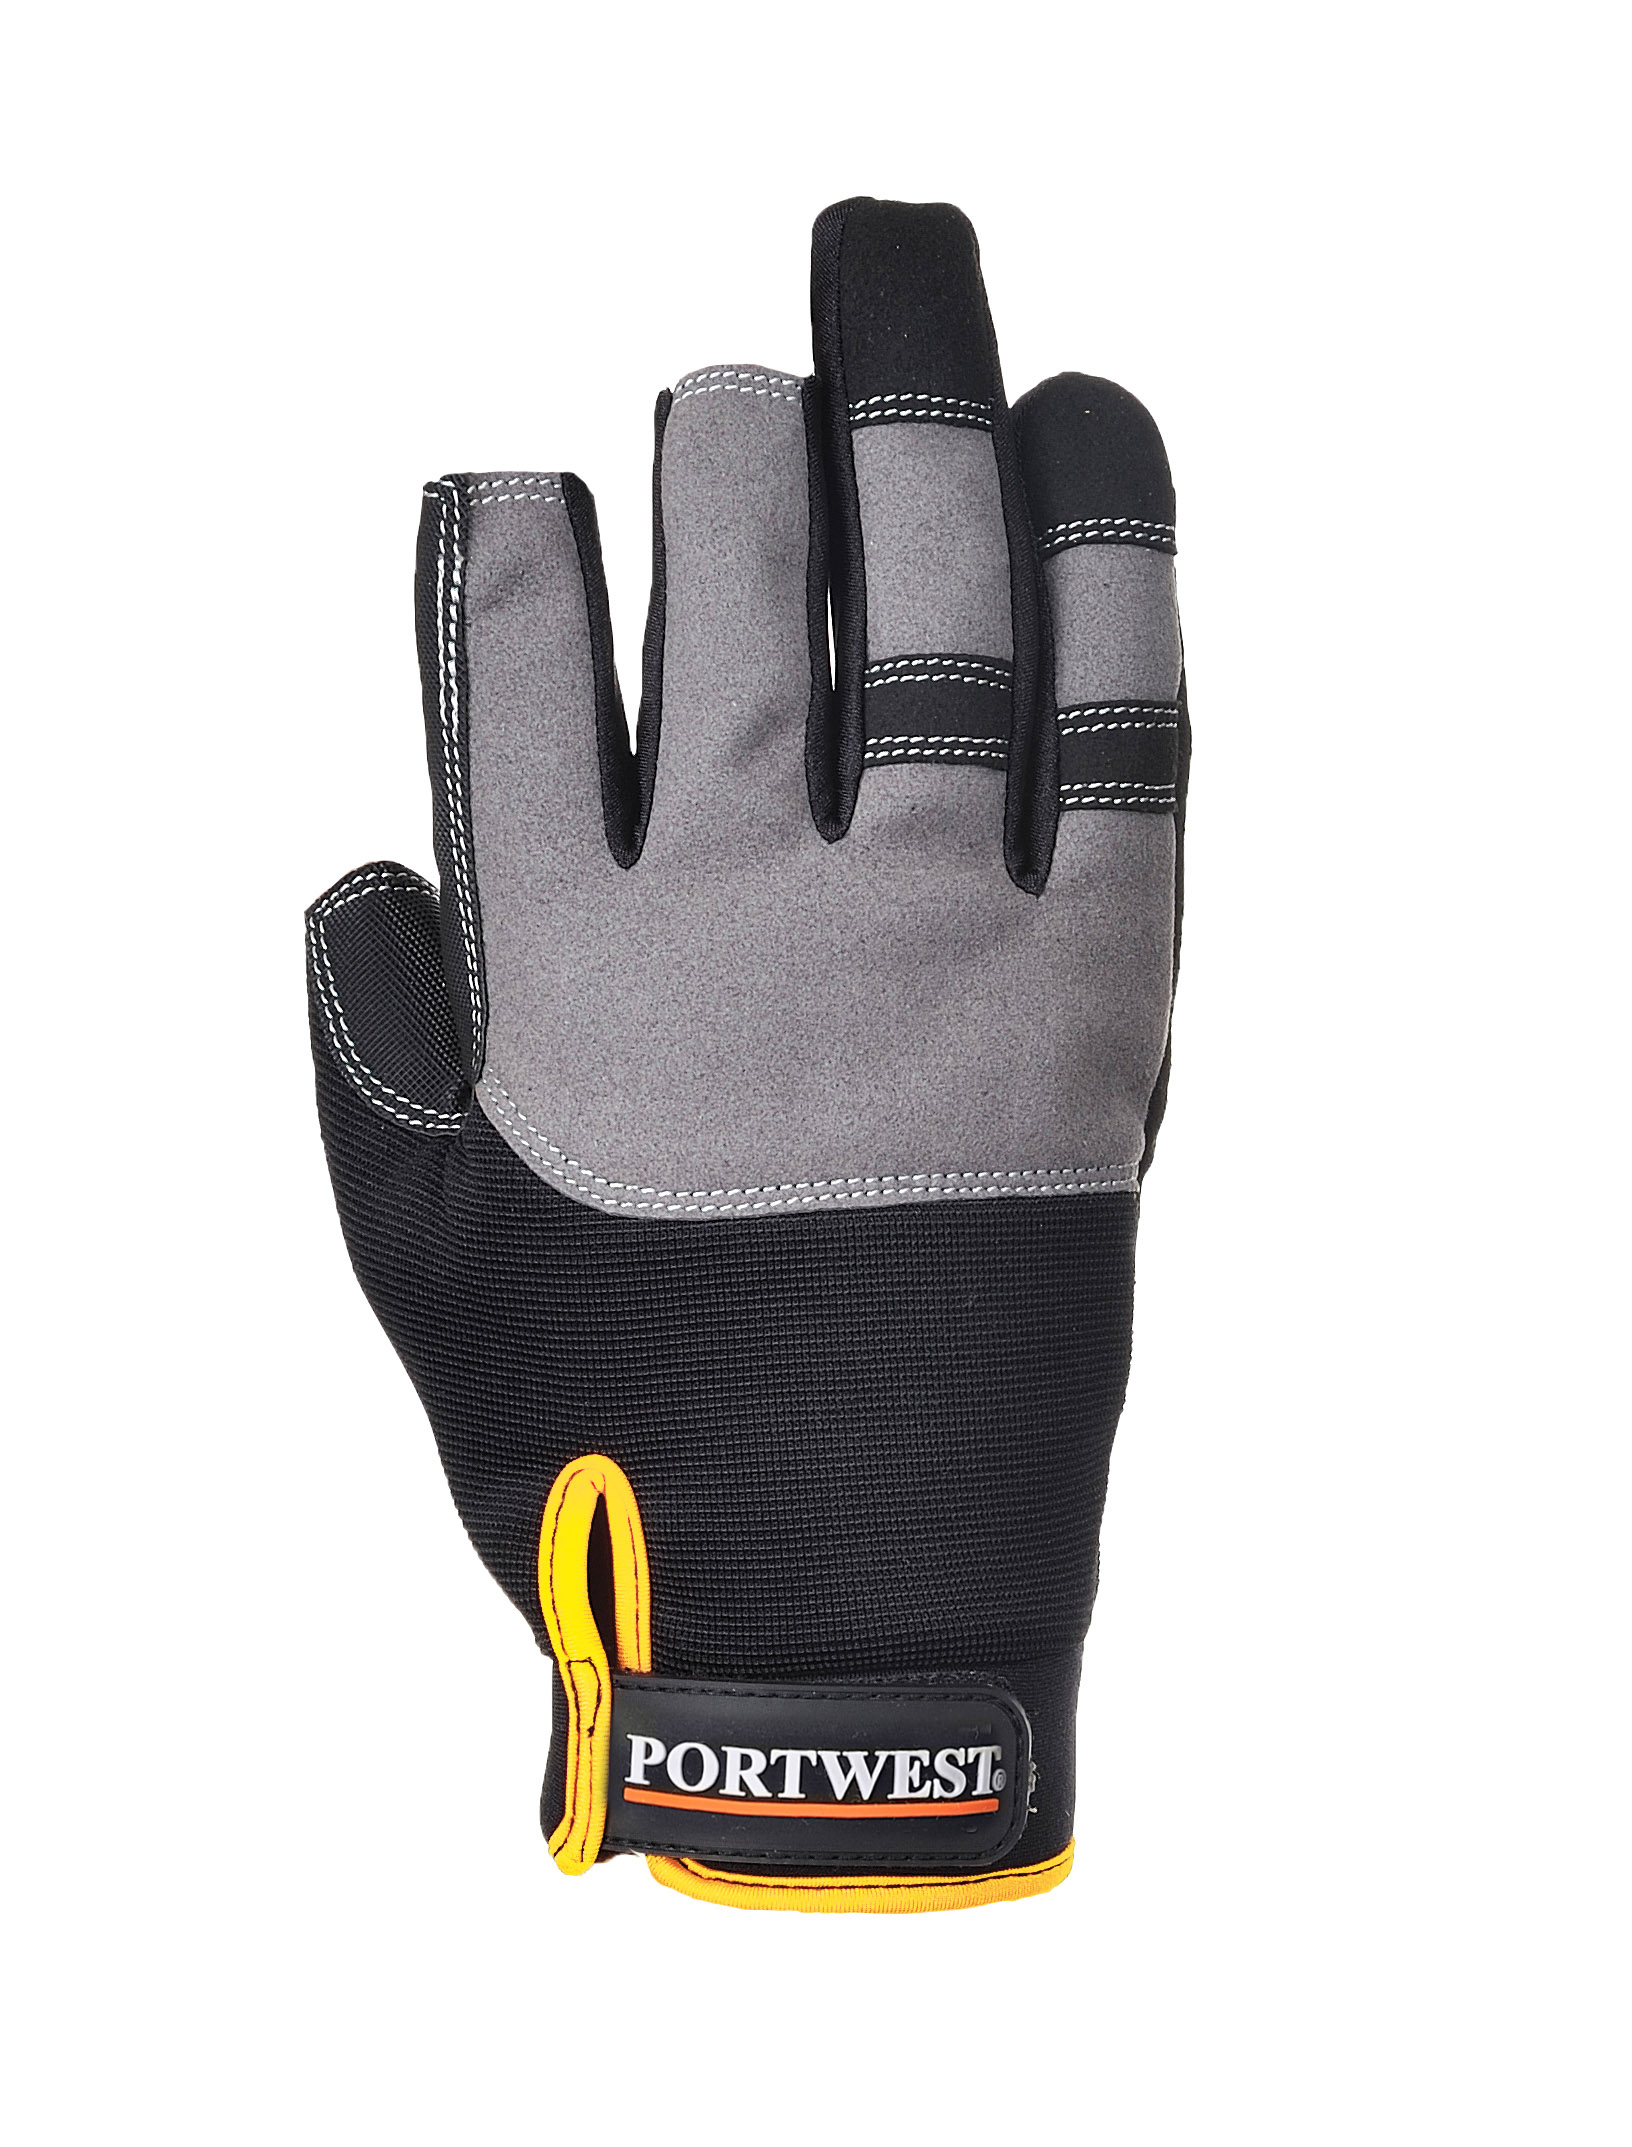 PORTWEST black anti-vibration and impact power-tool work glove A790